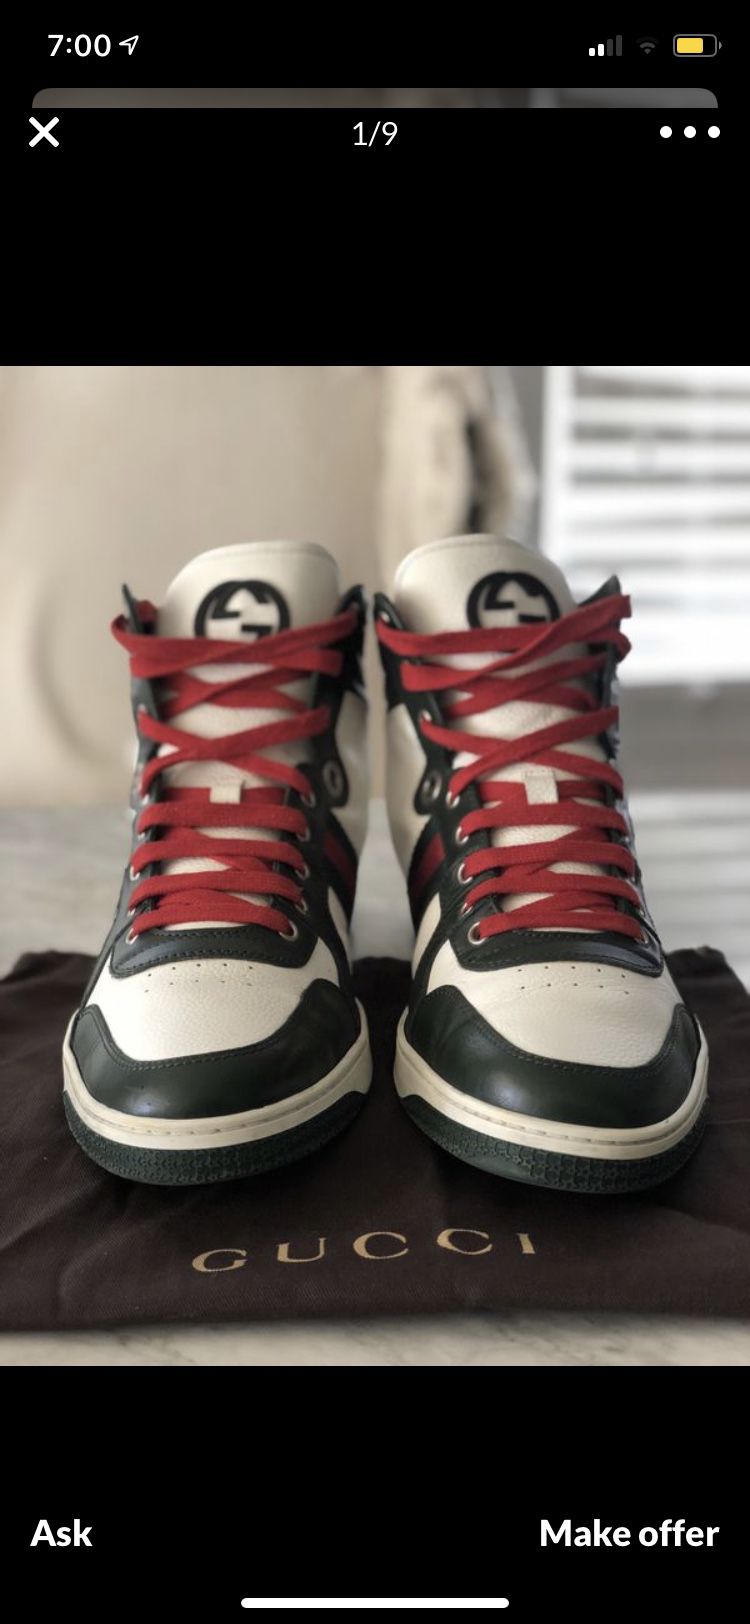 Gucci high top sneakers size 10 willing to trade I need size 9 to 9 1/2 Gucci, LV, red bottom shoe, any branded name shoes😃